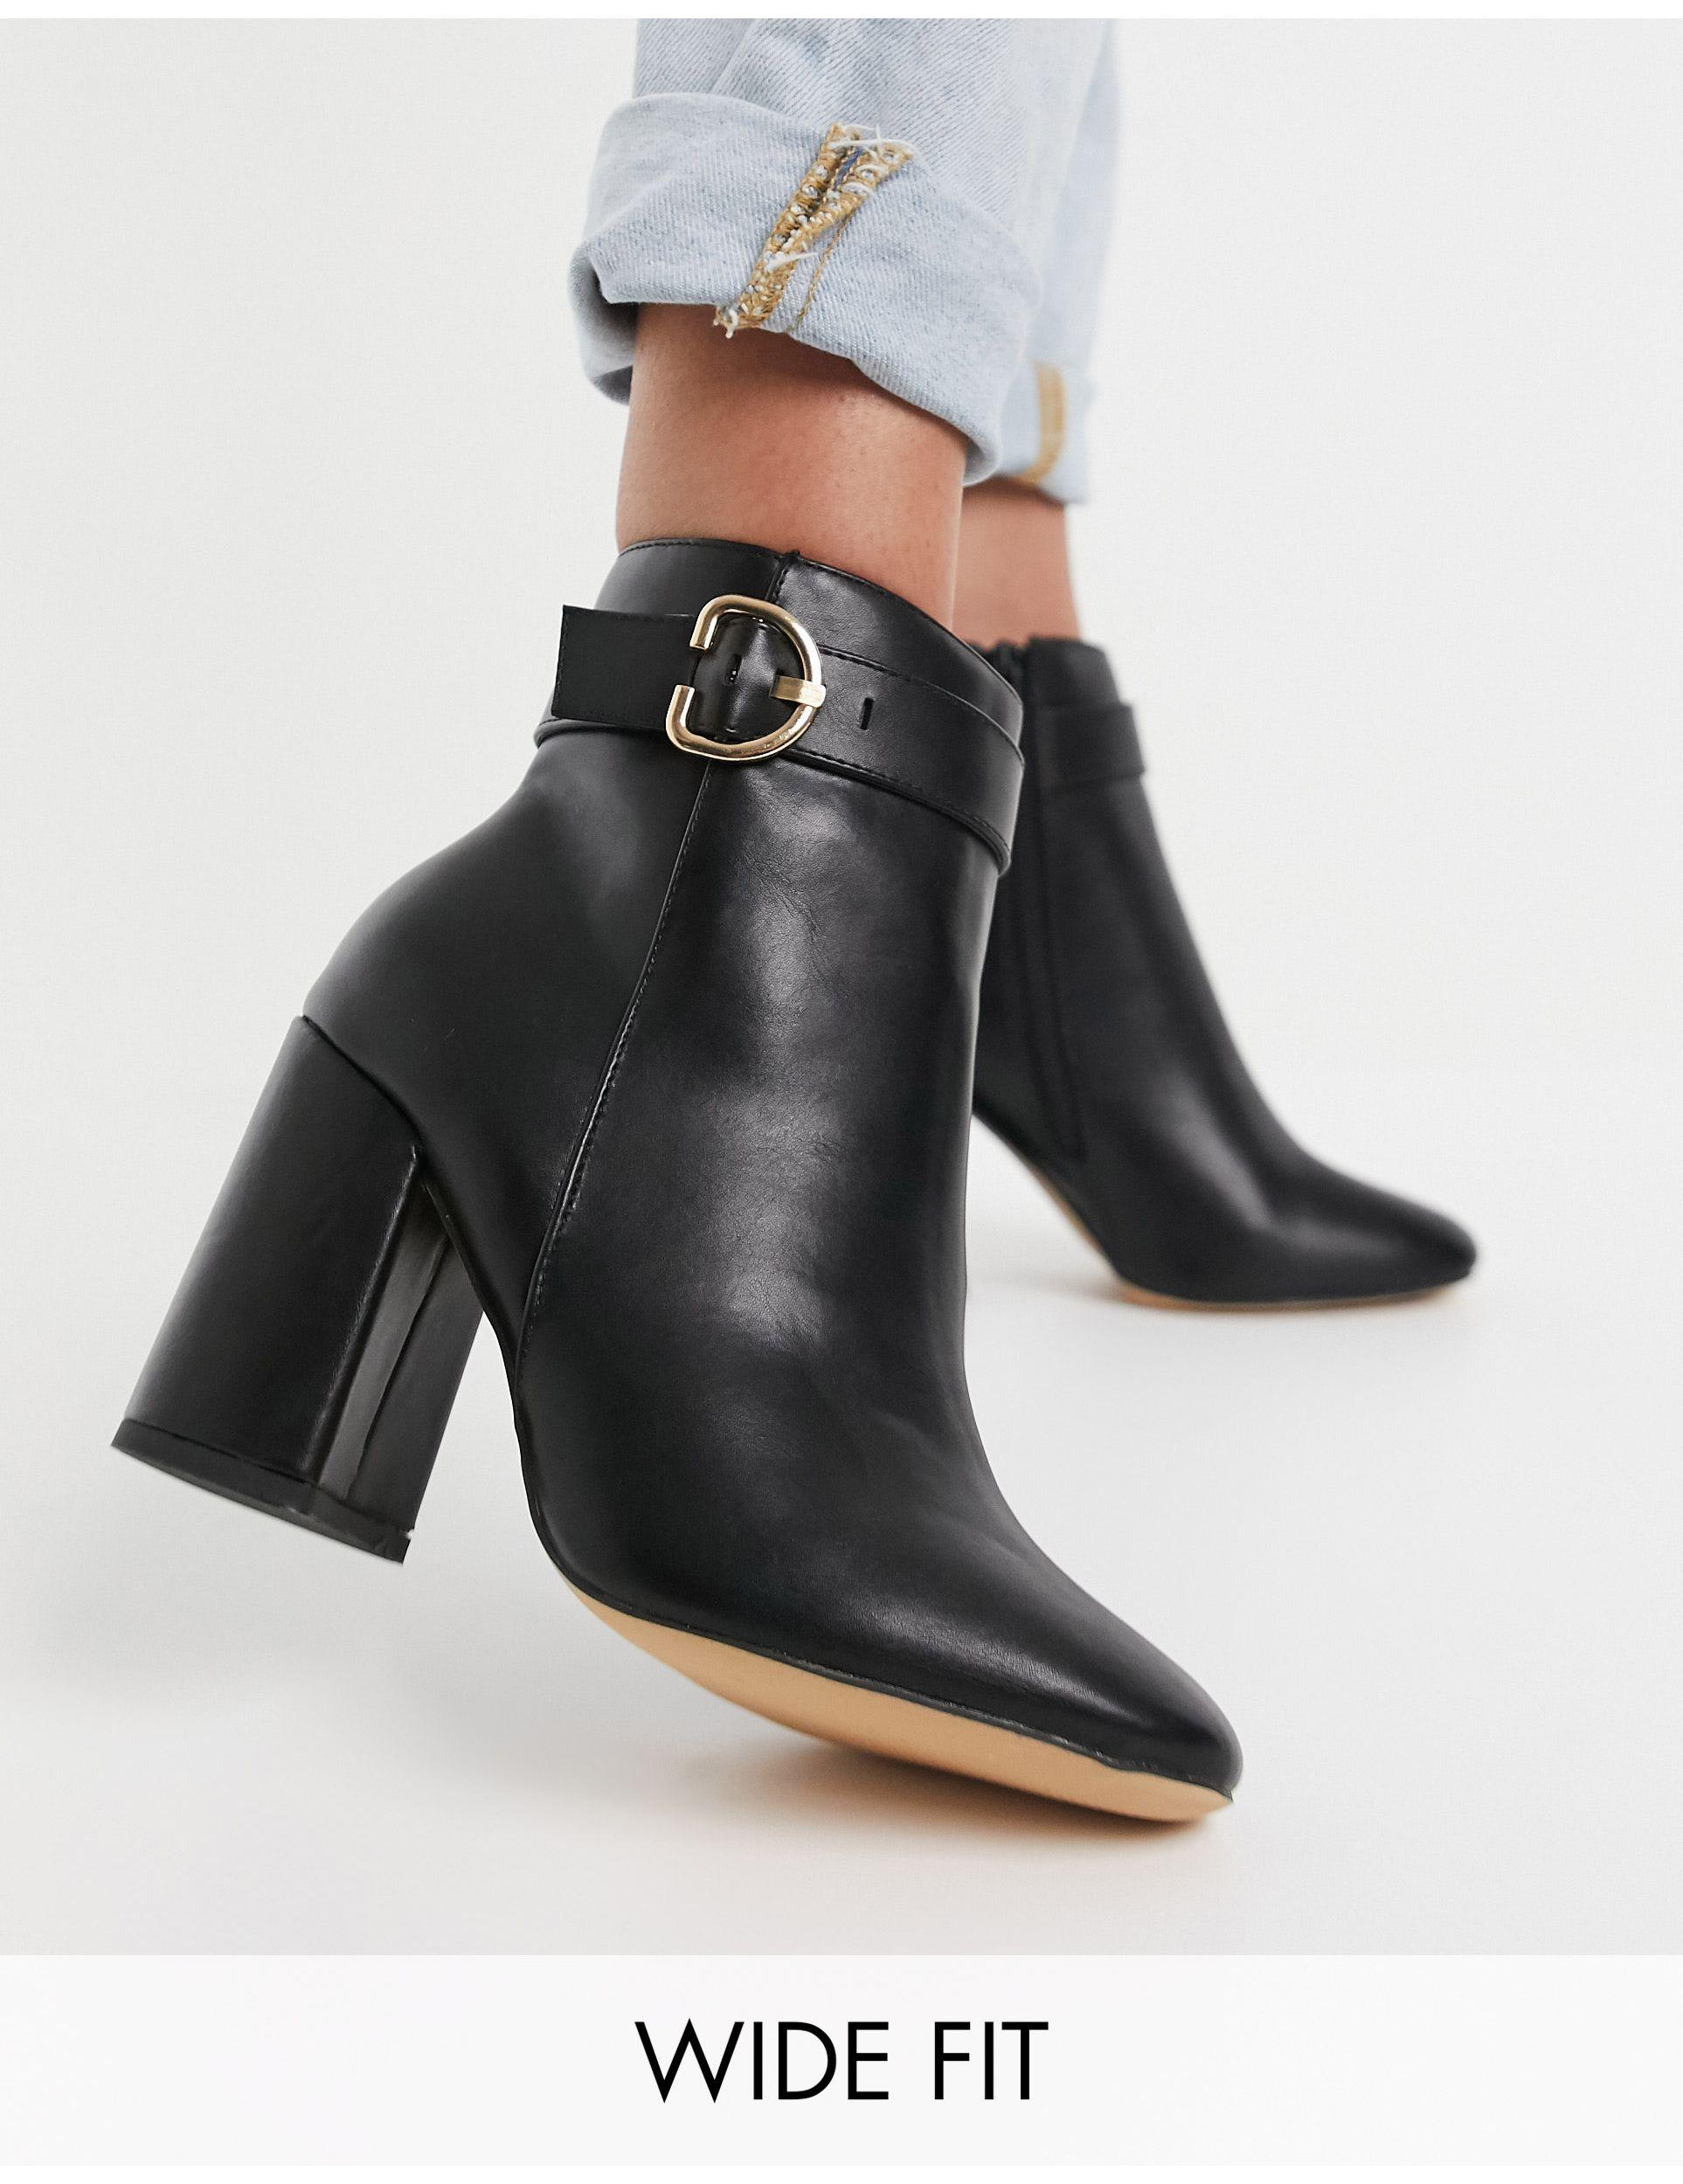 London Rebel Wide Fit Block Heel Ankle Boots With Gold Trim in Black - Lyst